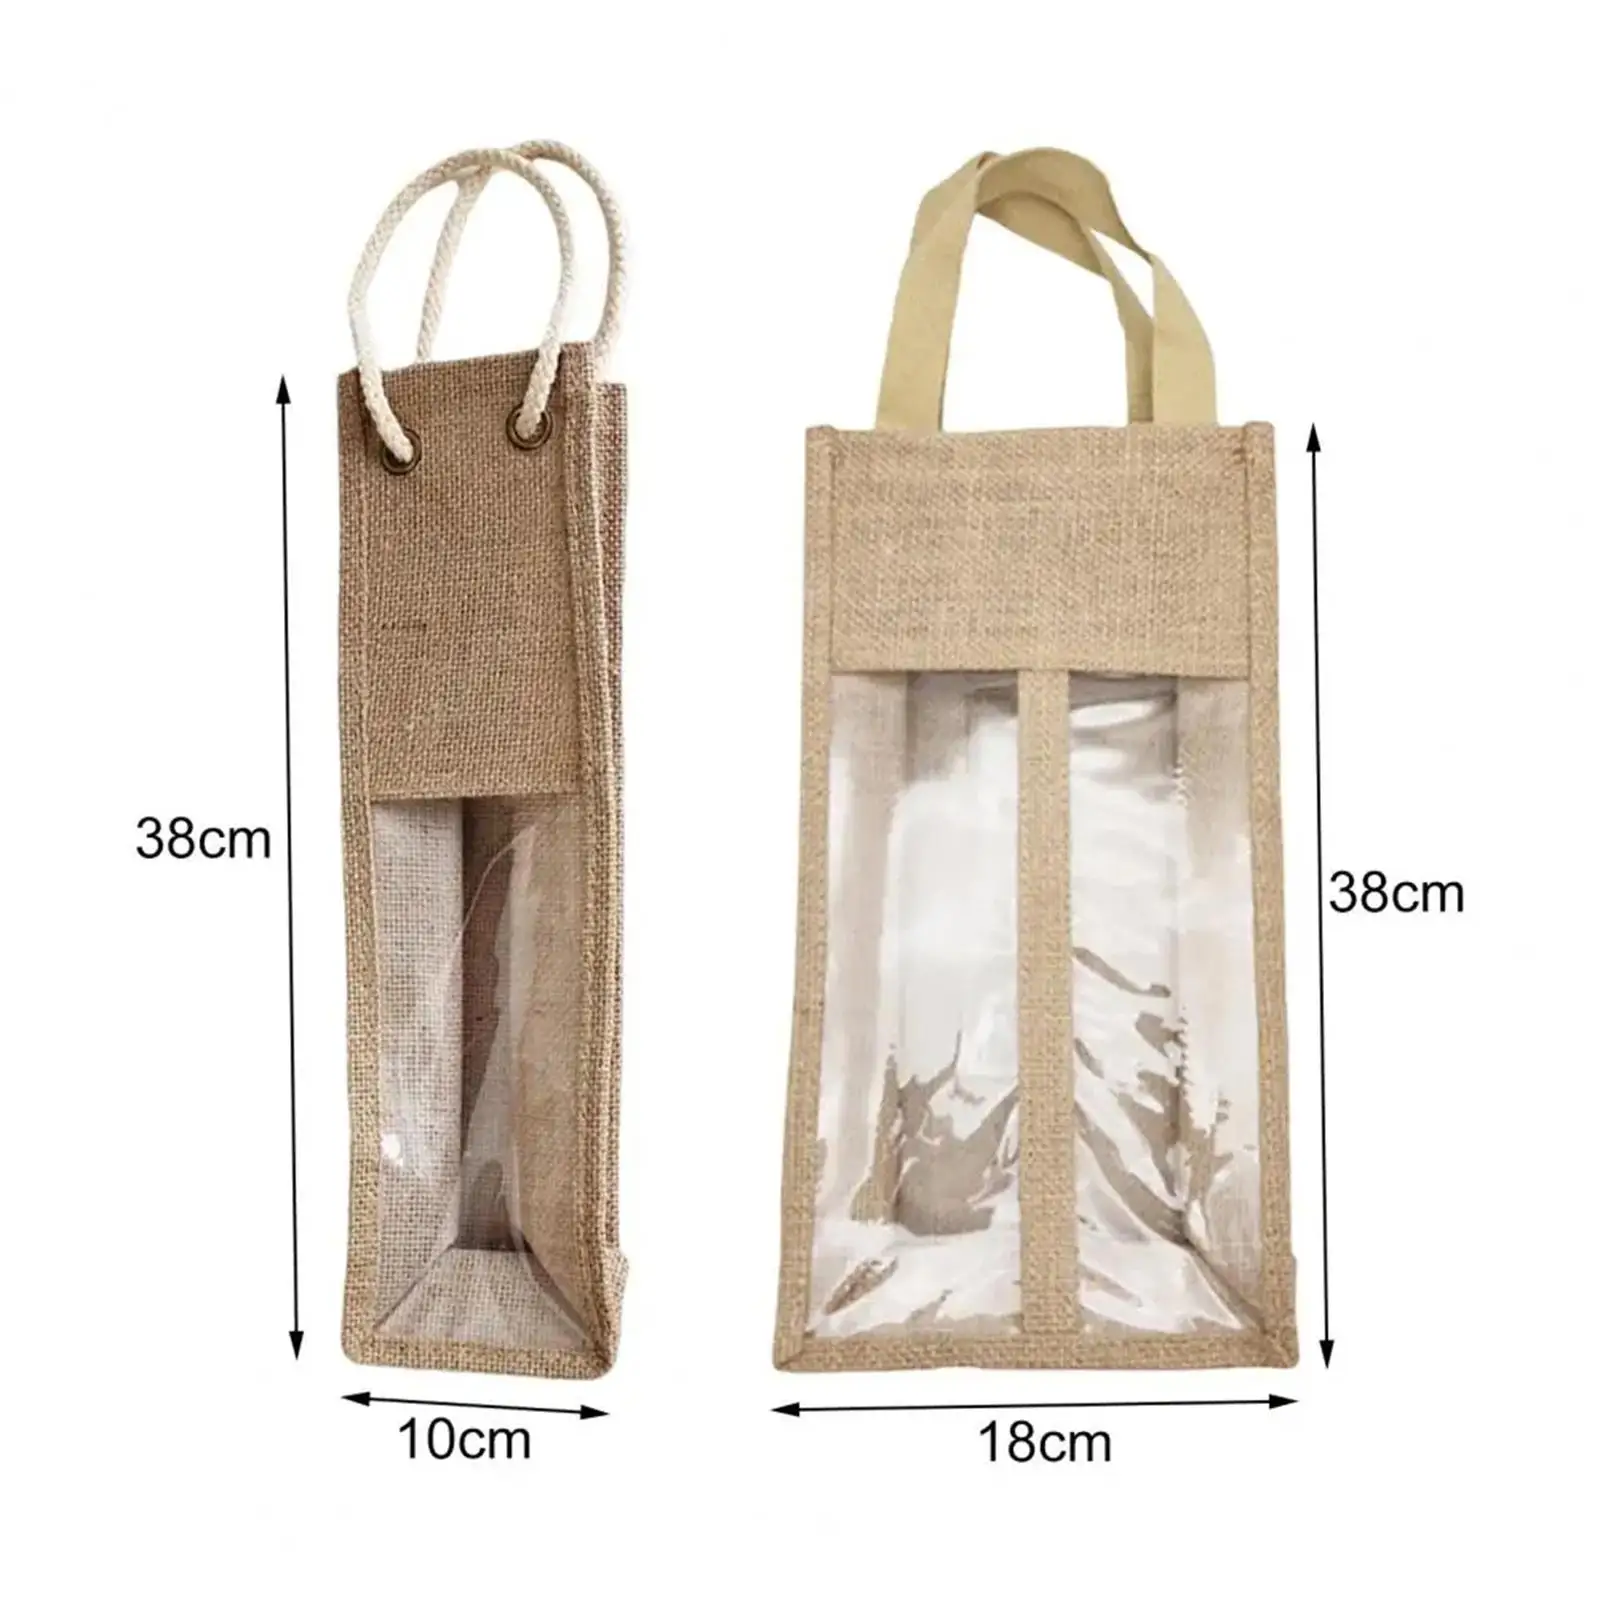 Wine Bottle Bag Portable Festival Party Supply Reusable Wine Bottle Covers Tote for Parties Wedding Birthday Home Decor